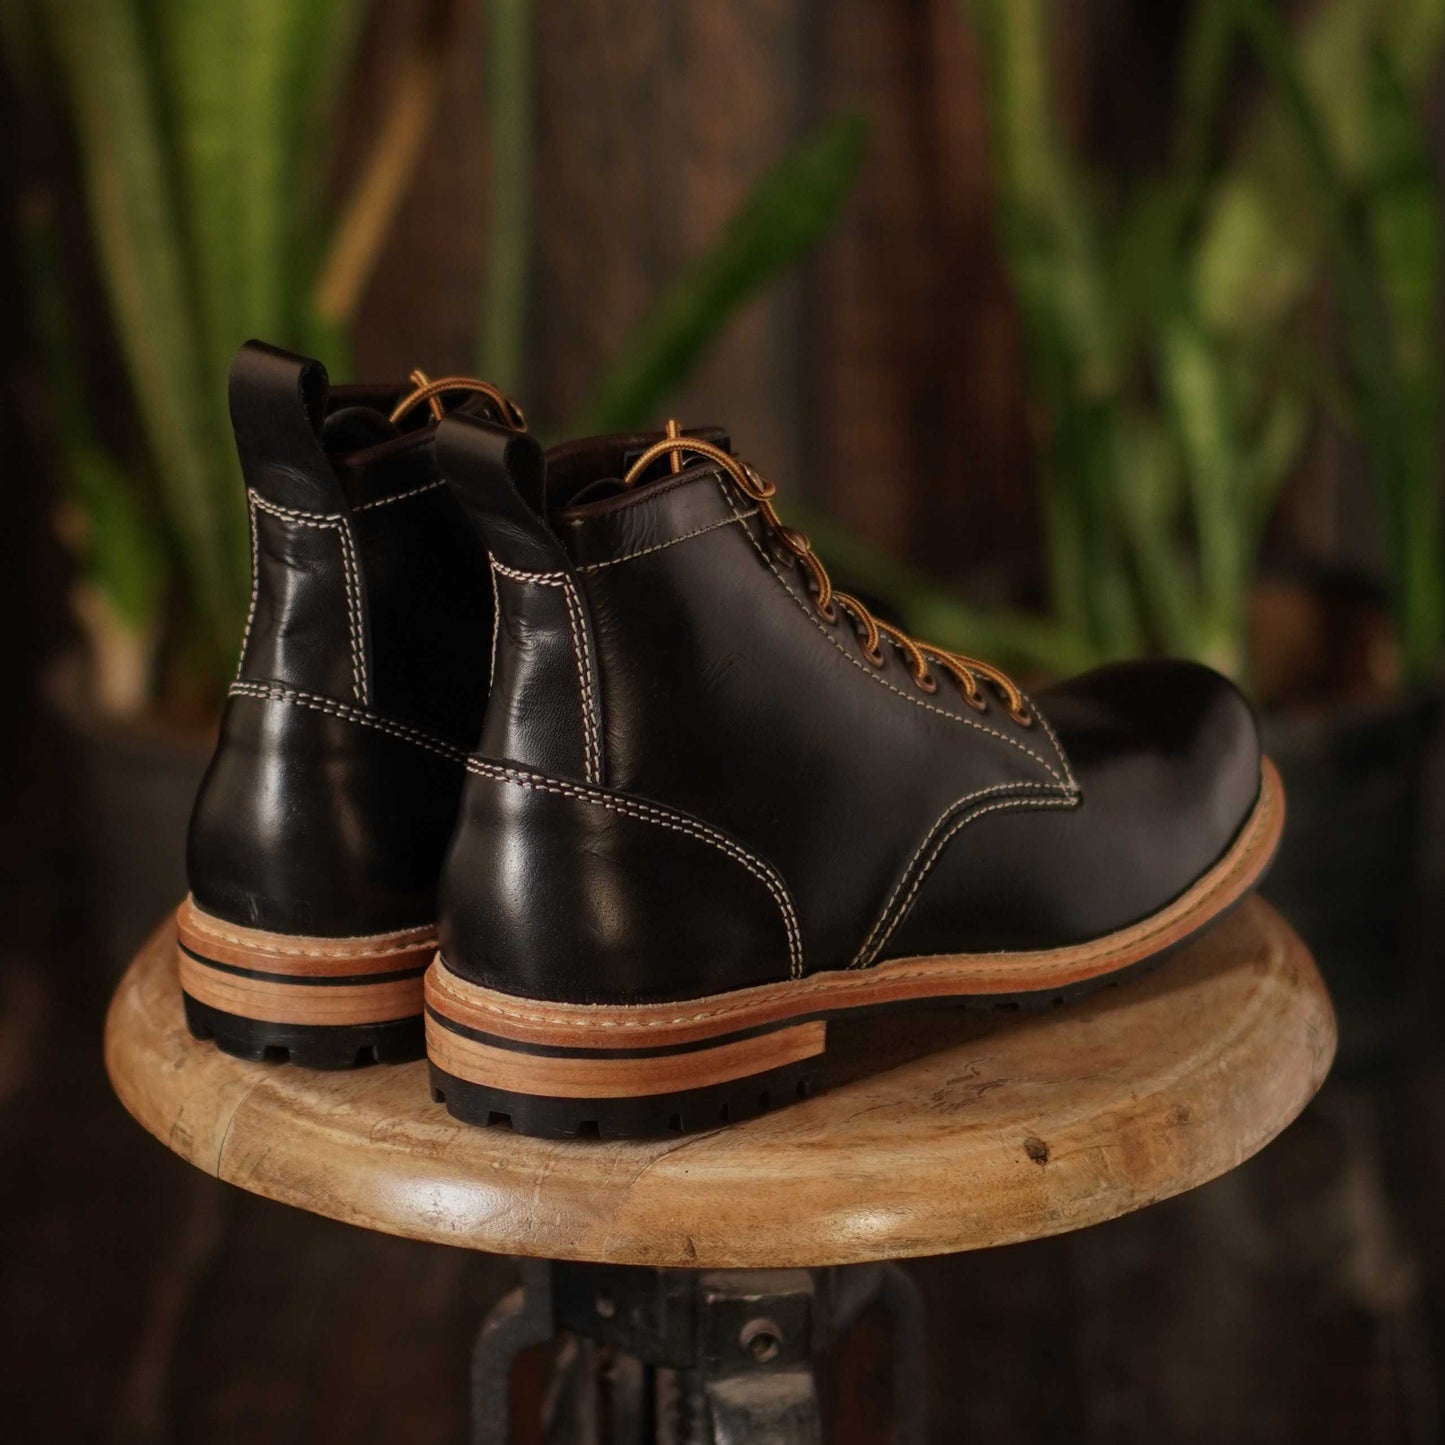 Task Boots (Raven Black) Goodyear Welted